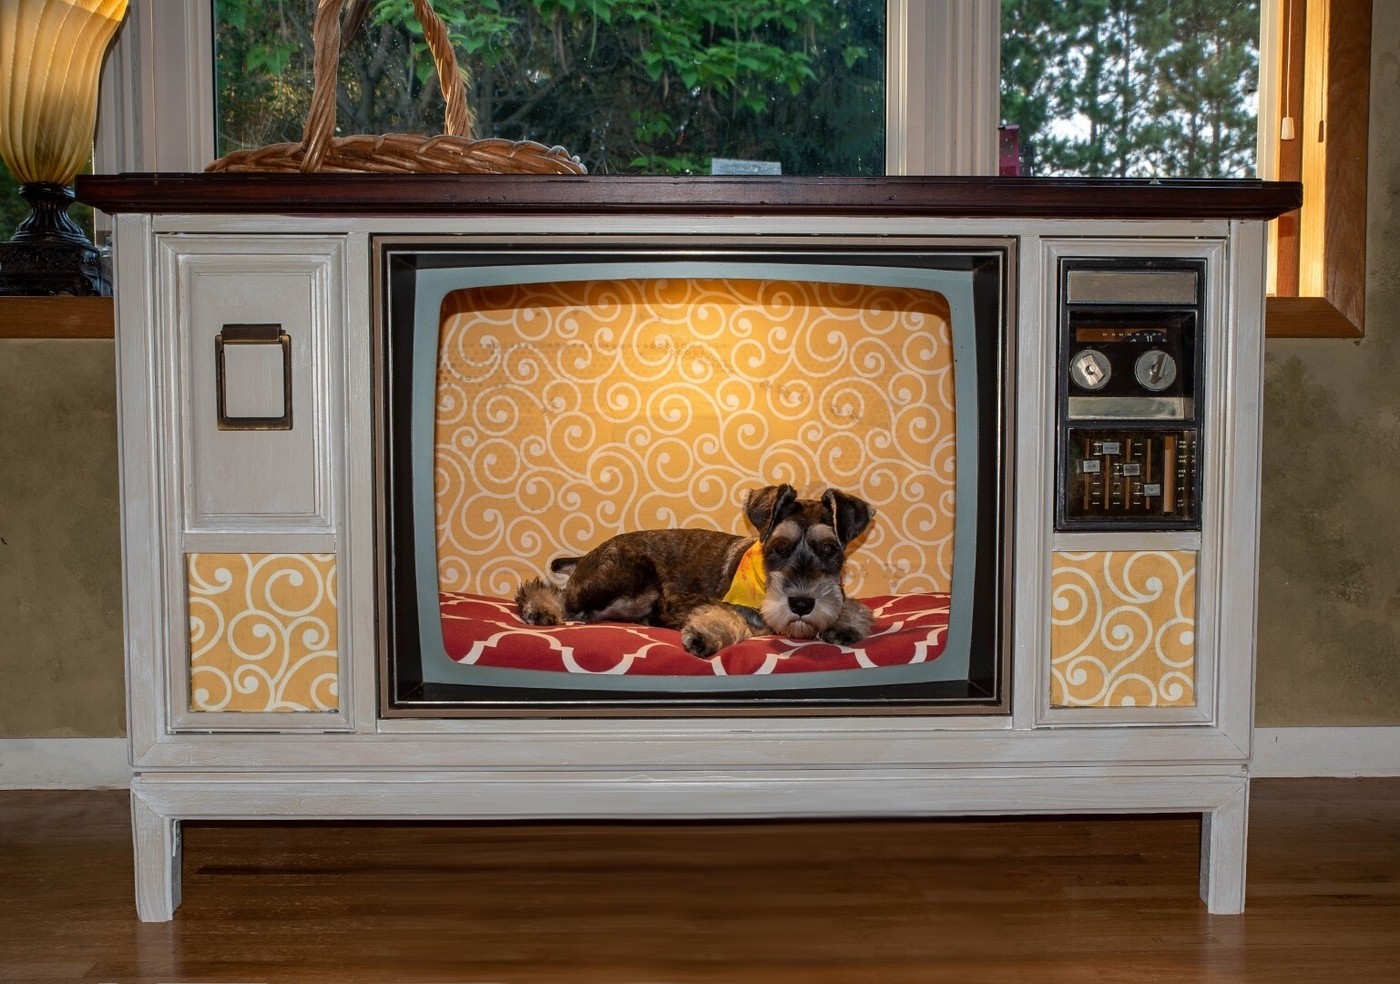 Upcycled television